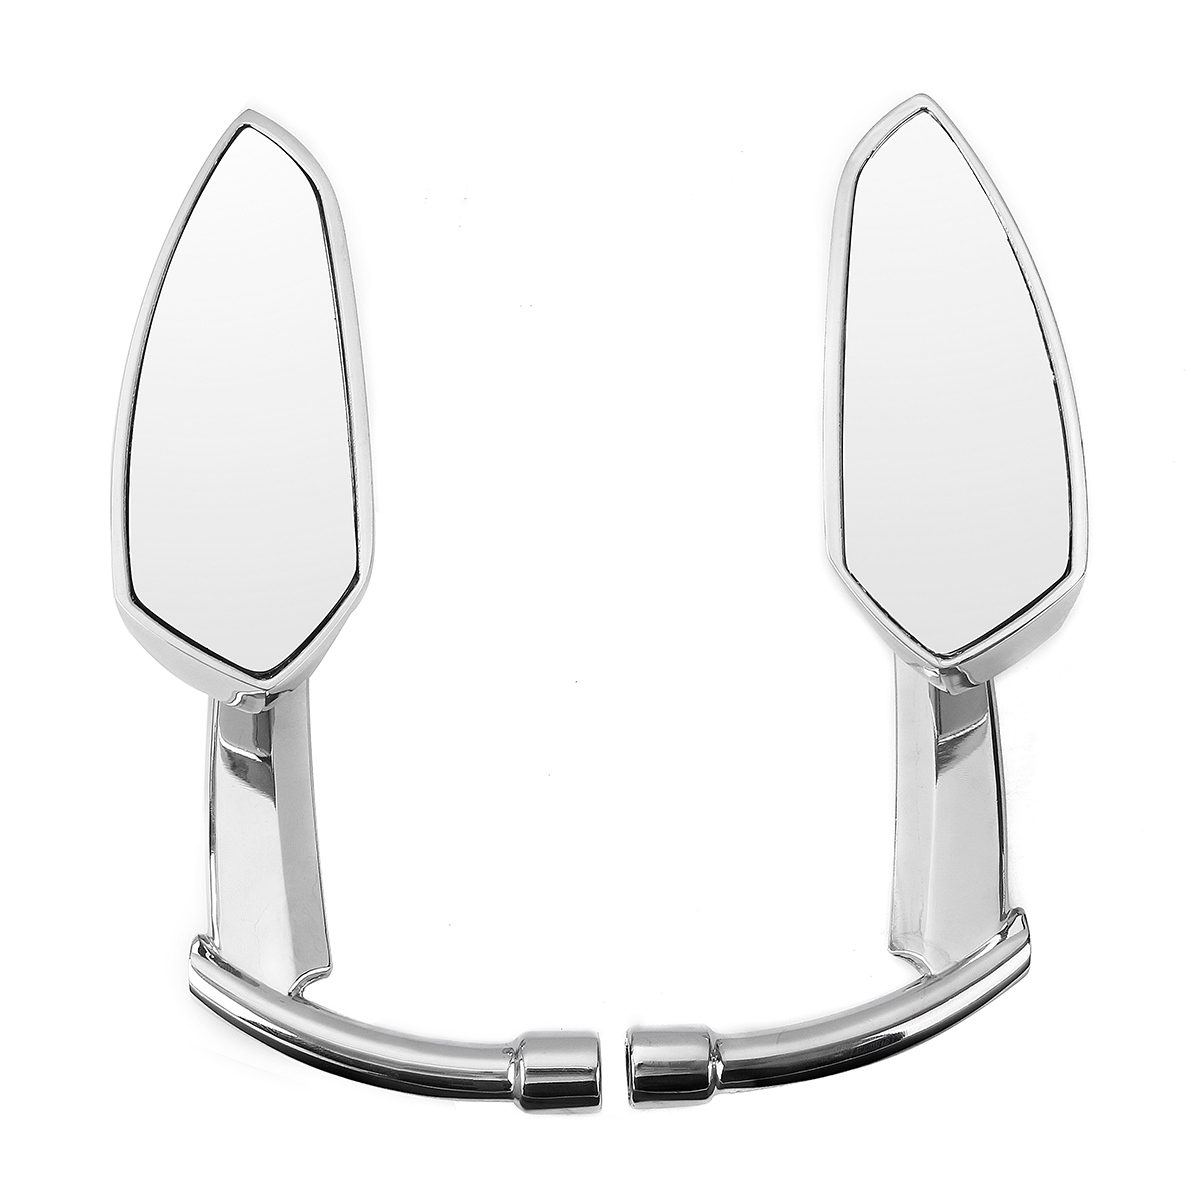 

8mm 10mm Chromed CNC Blade Rear Review Mirrors For Harley Dyna Heritage Softail Sportster